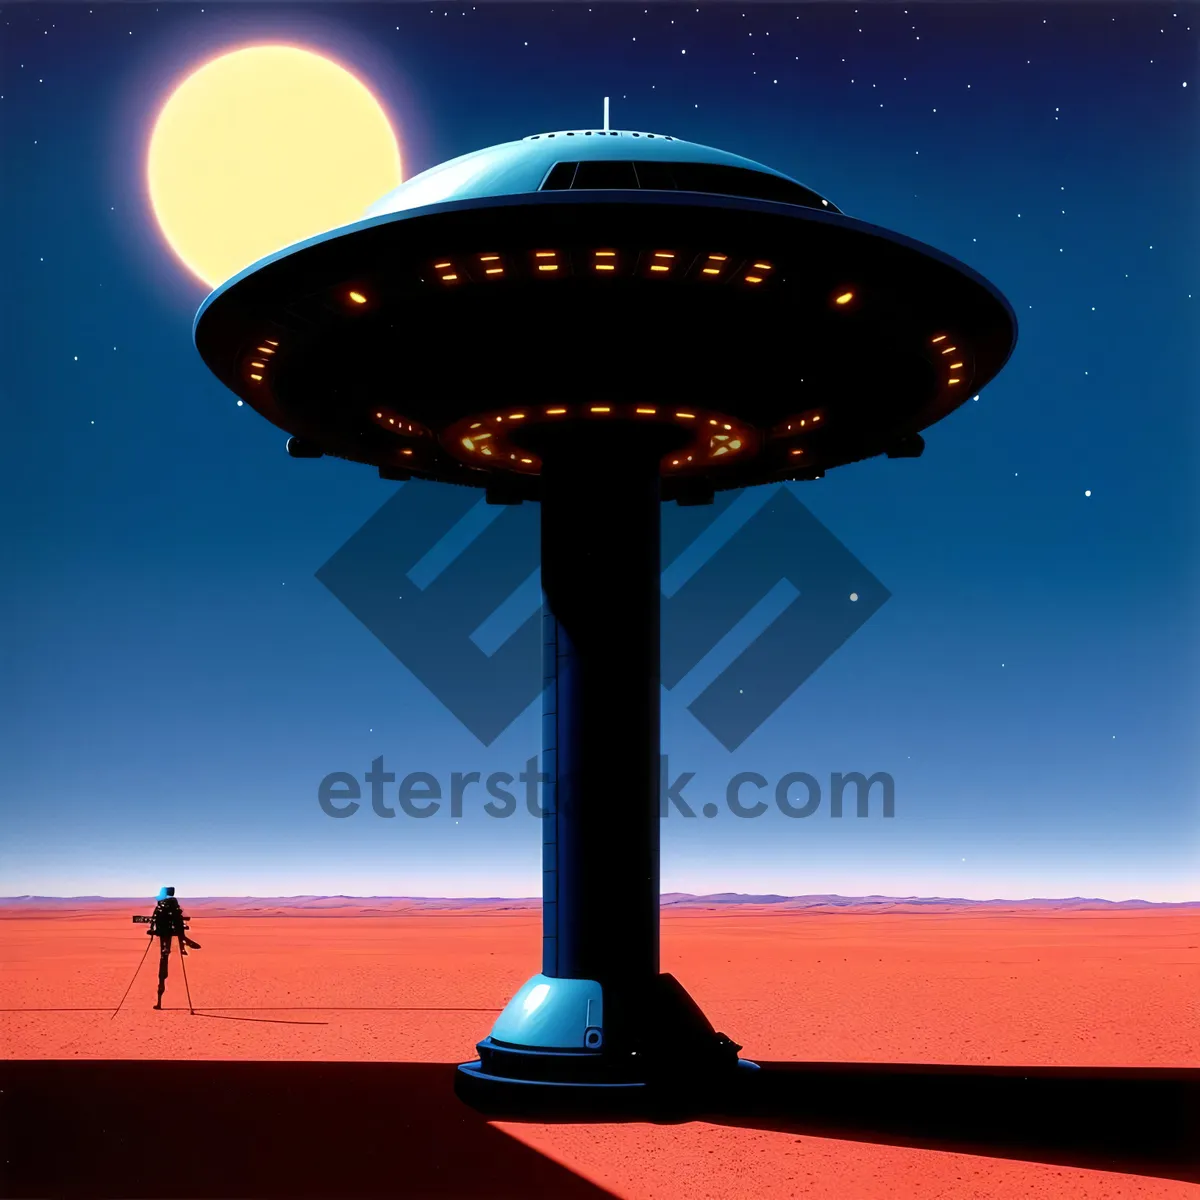 Picture of Ethereal Sky Fountain with Radio Telescope Structure